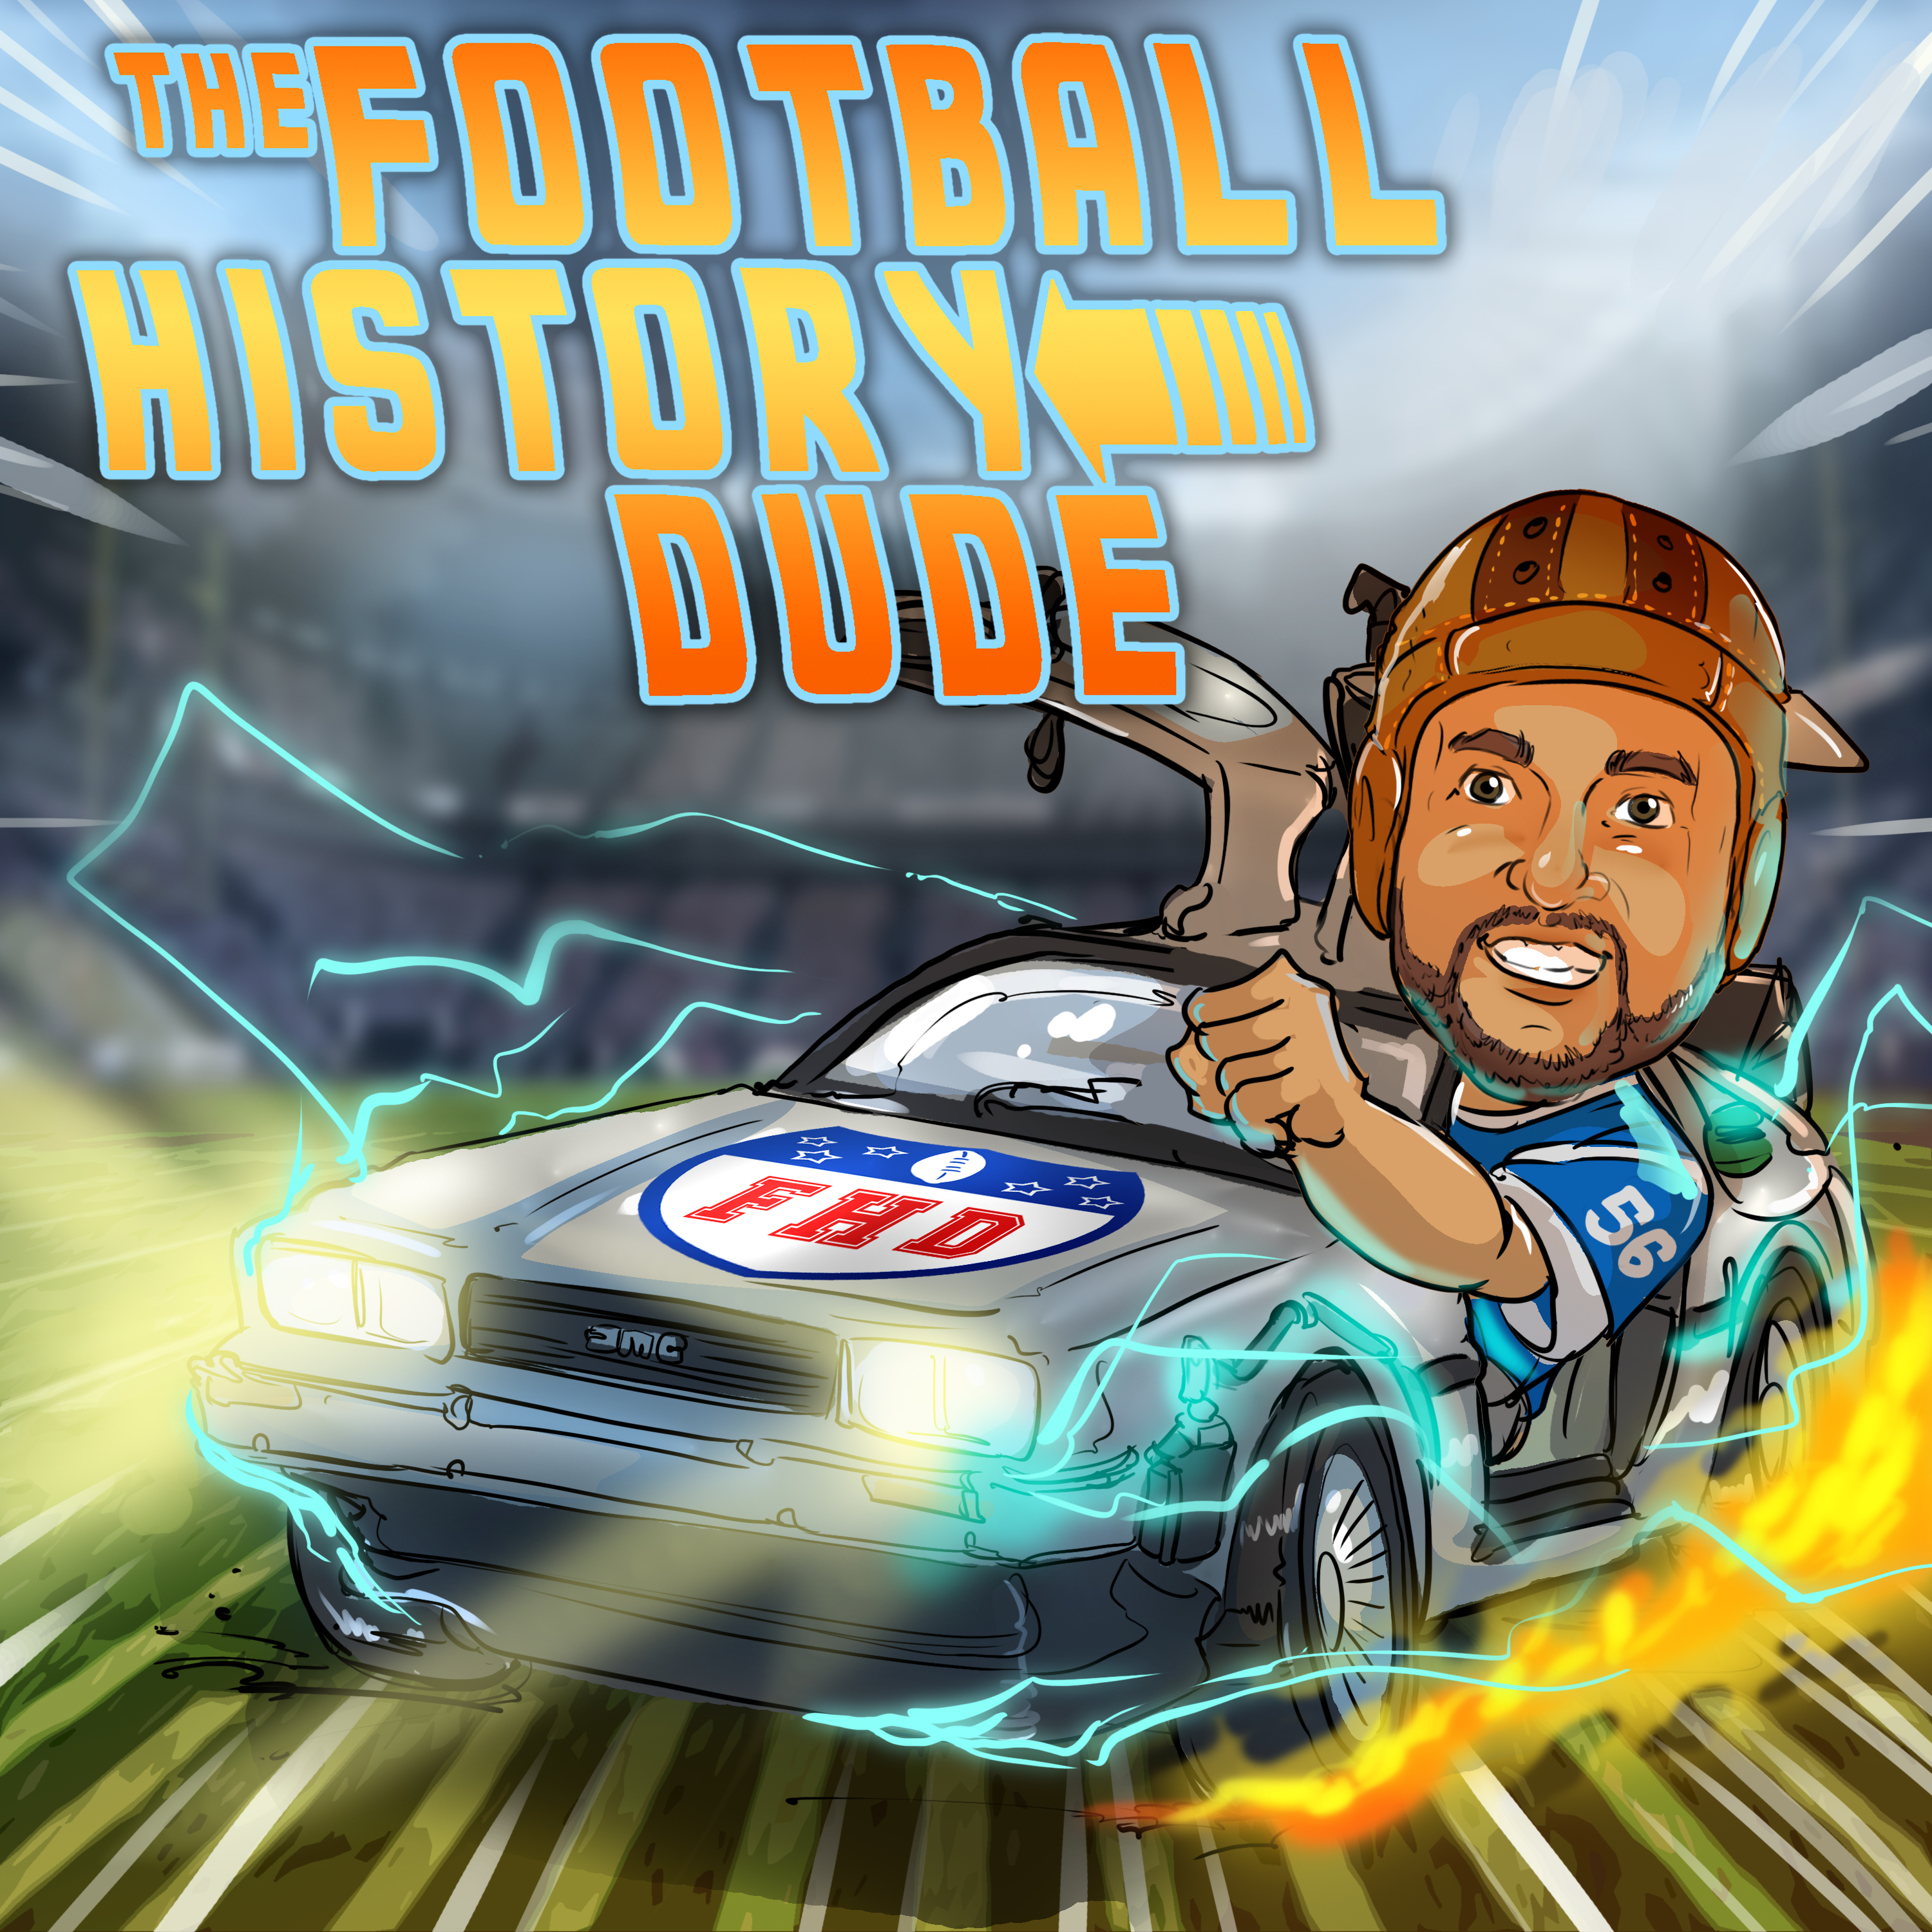 Artwork for podcast The Football History Dude